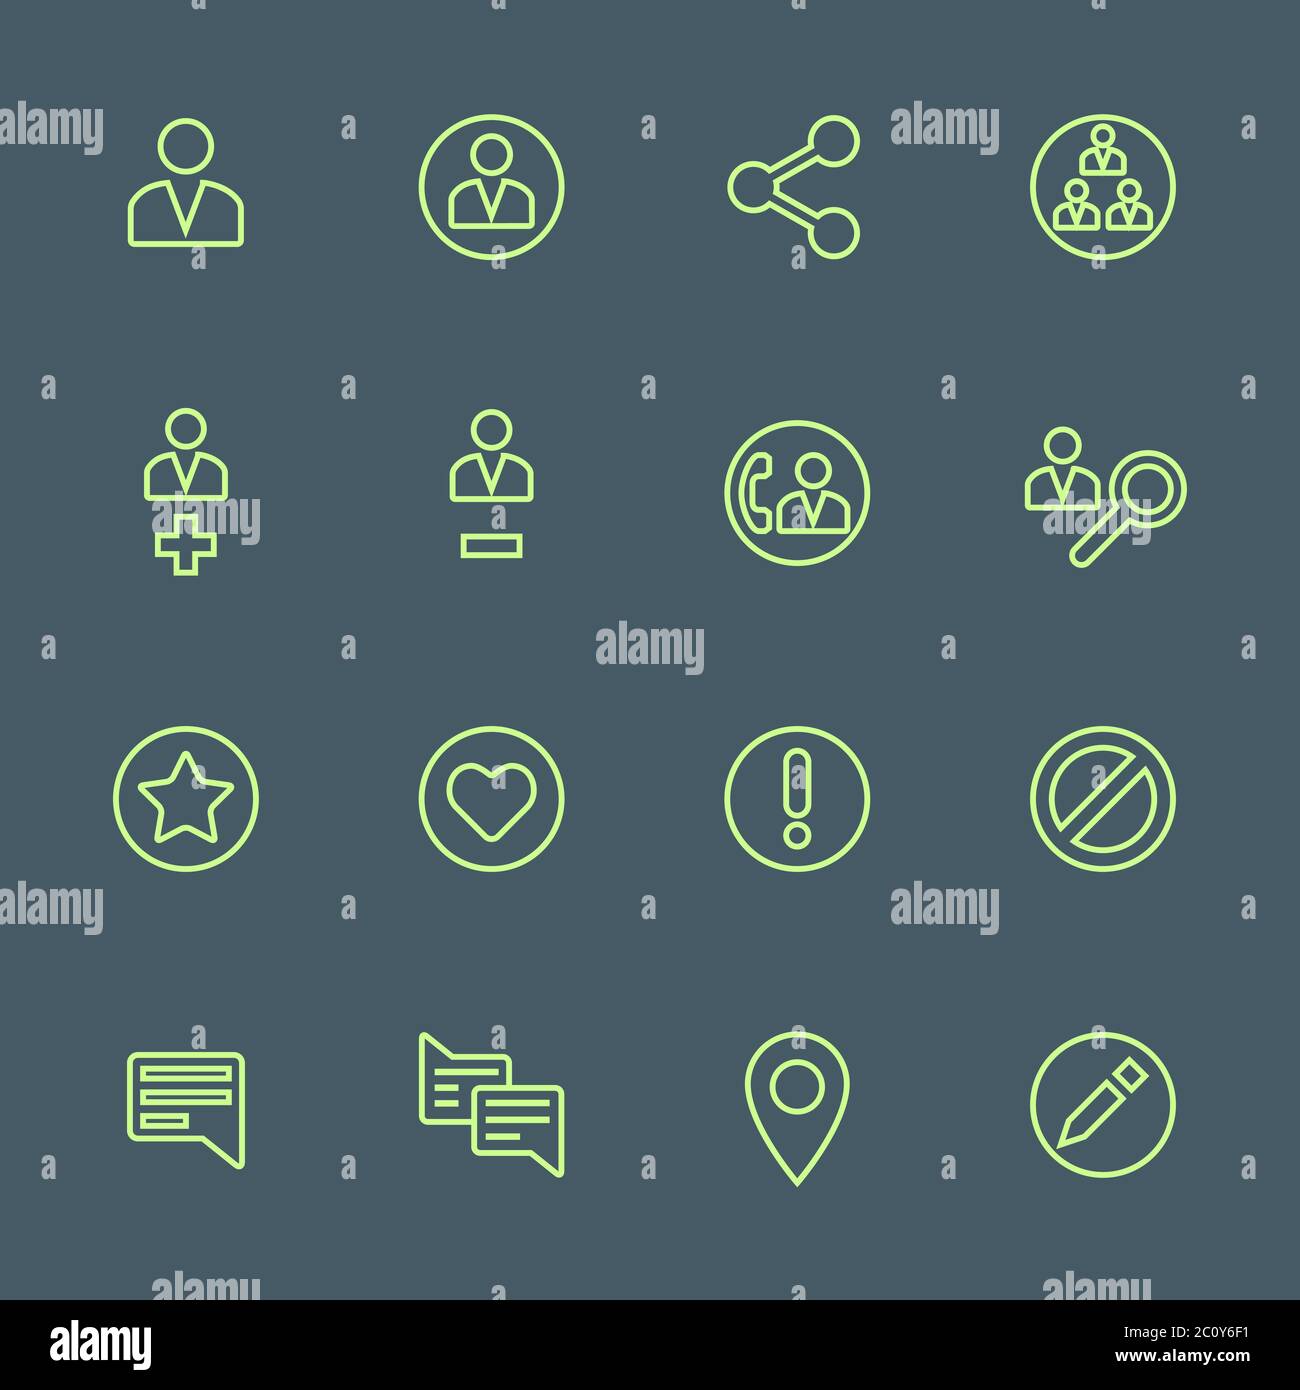 green outline various social network actions icons set Stock Photo